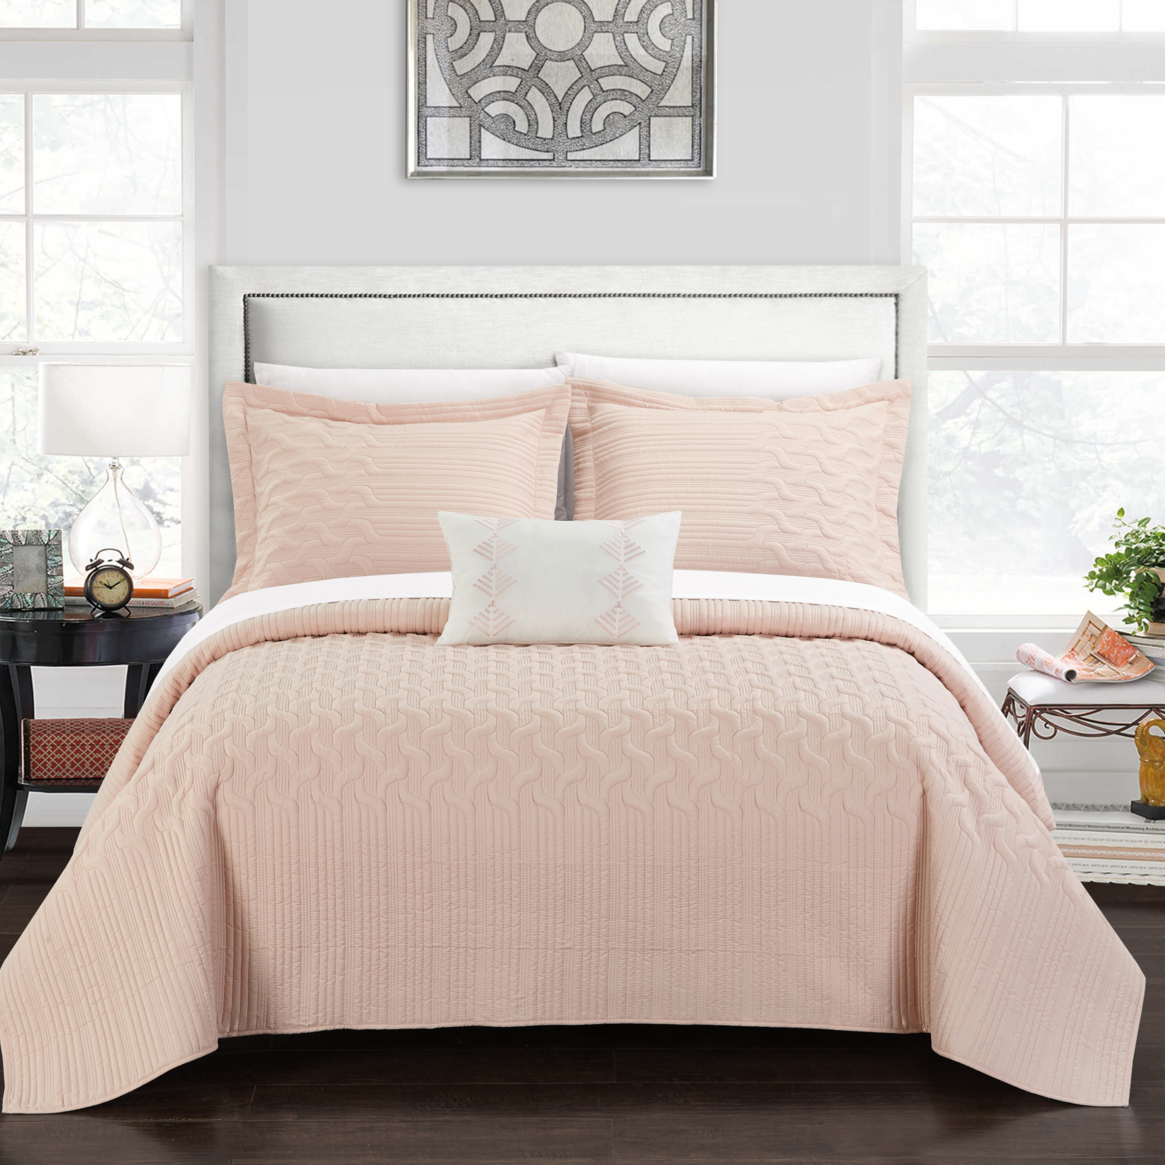 Shaliya 8 Or 6 Piece Quilt Cover Set Interlaced Vine Pattern Quilted Bed In A Bag - Blush, Twin